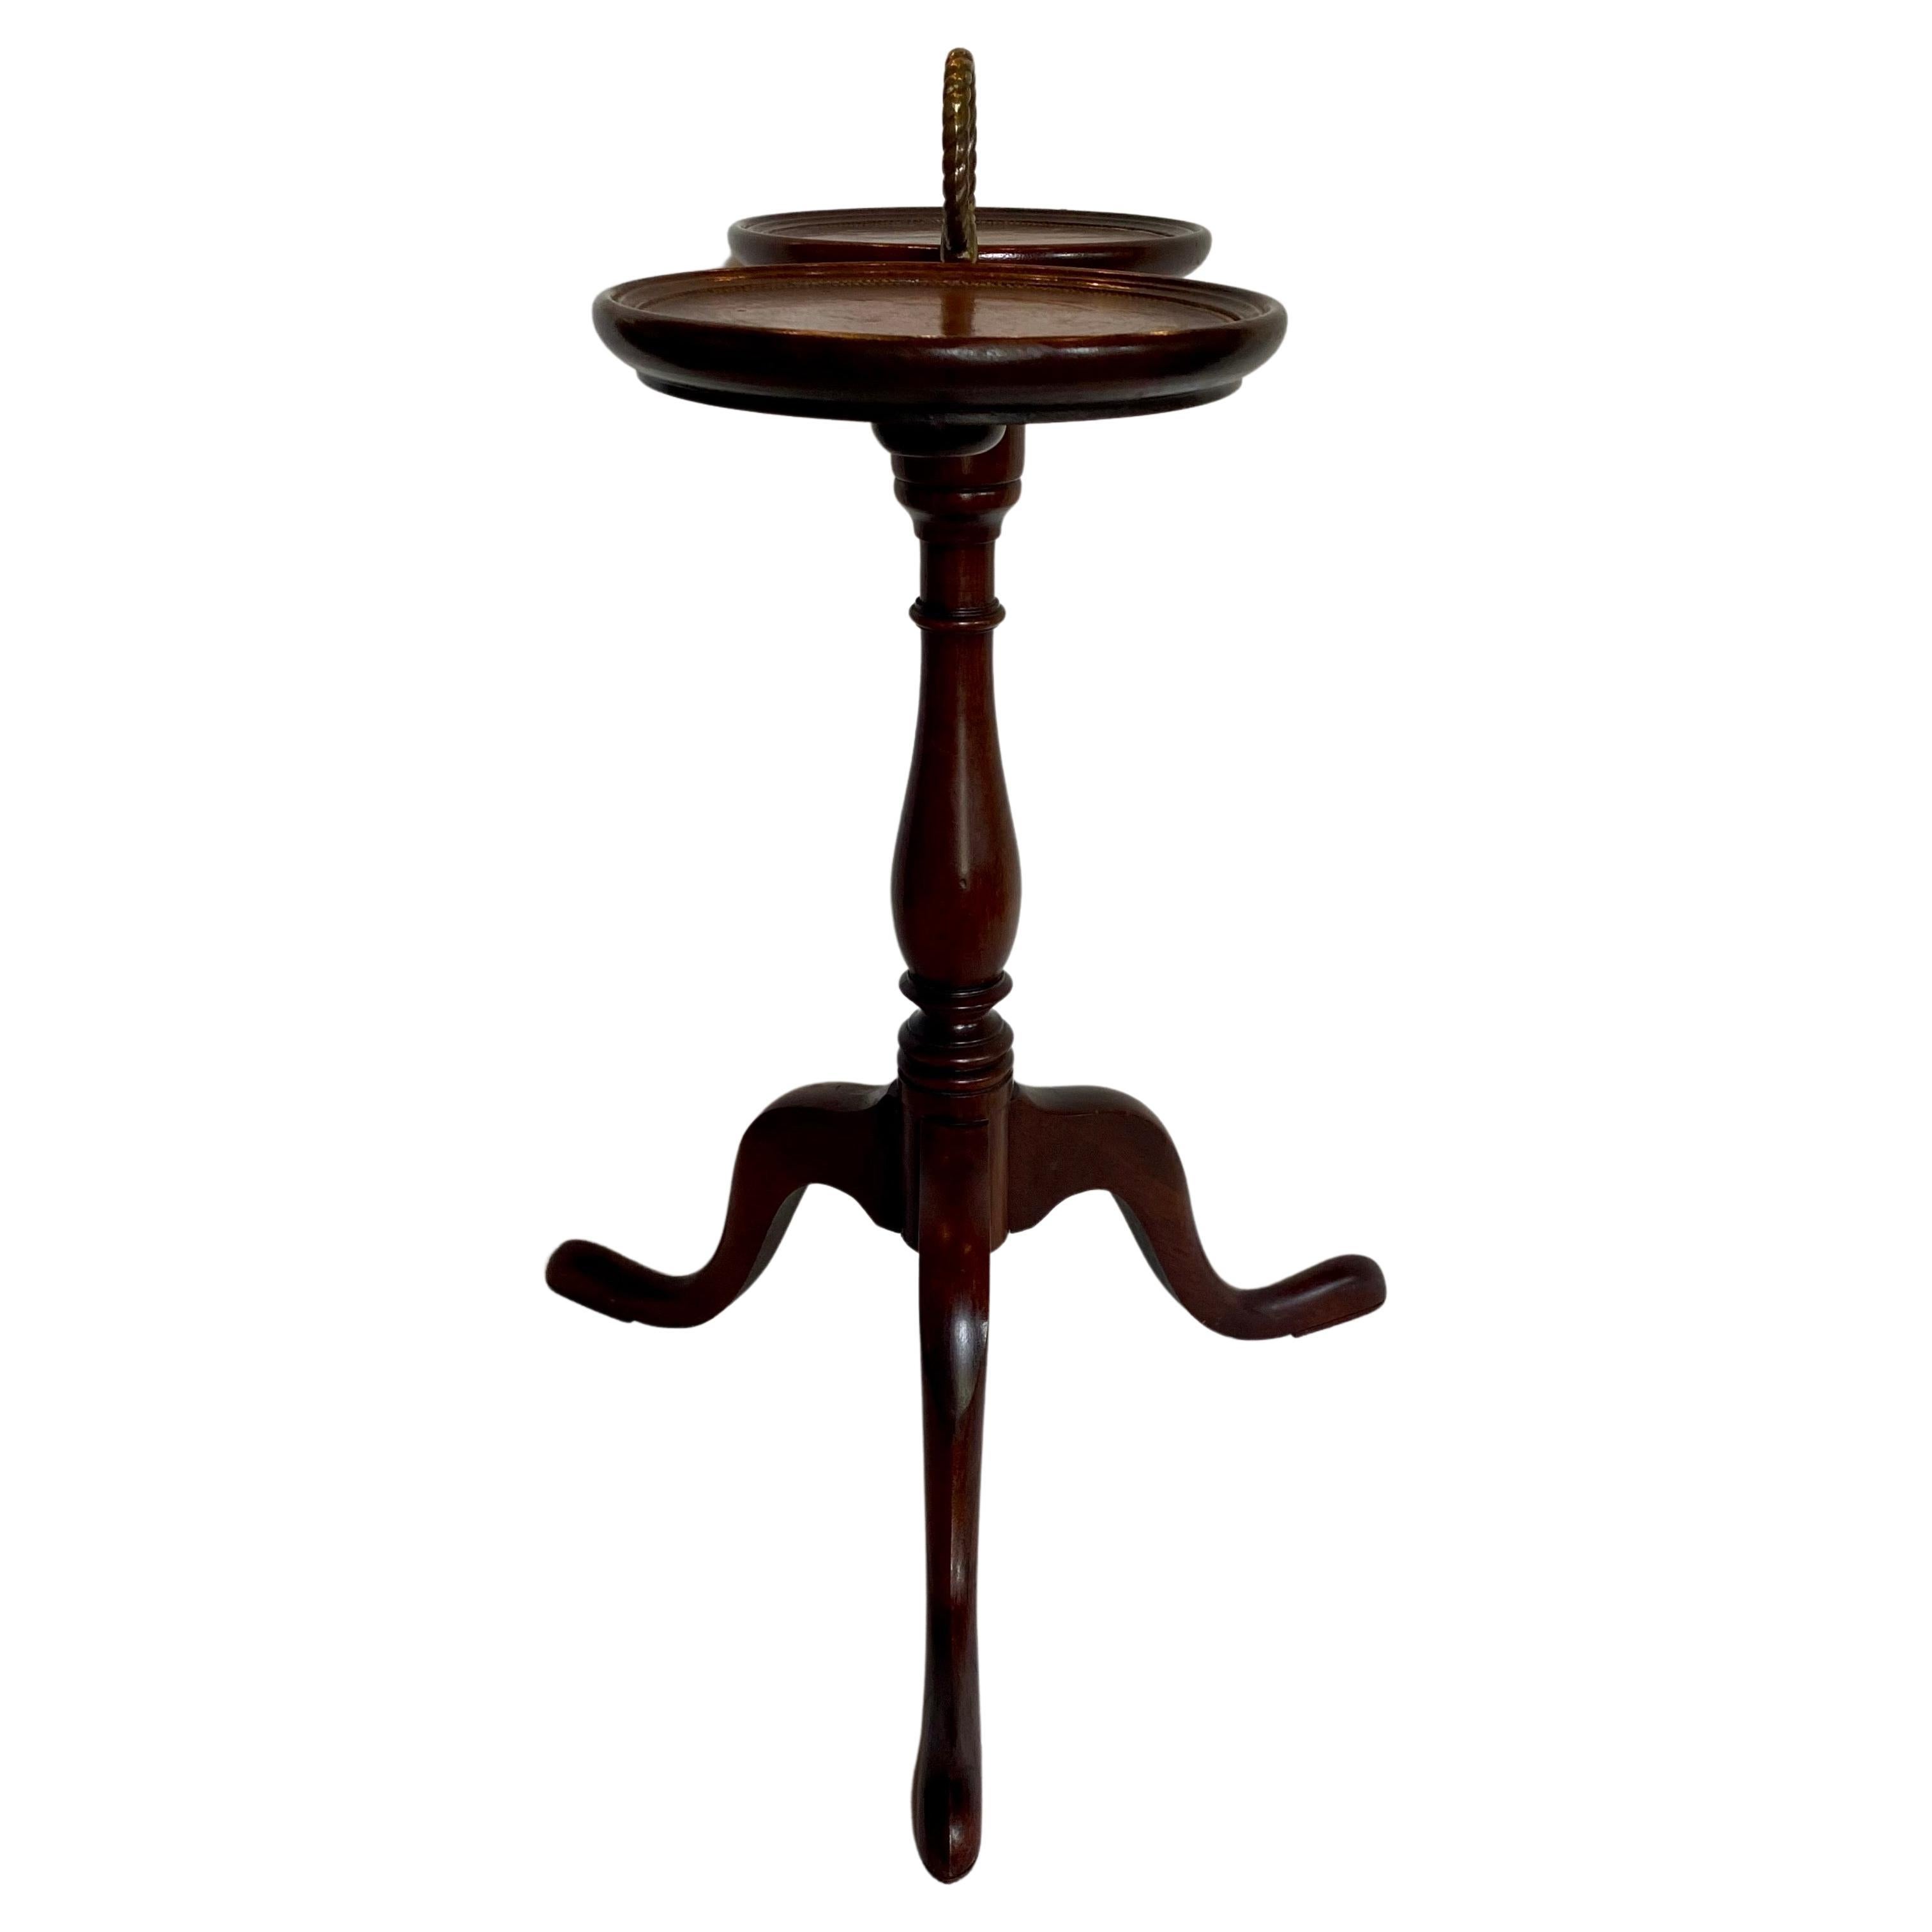 Mahogany double pedestal side accent table by Brandt Furniture Company. Two round tooled brown leather tops sit atop three Queen Ann shaped legs. The perfect sized drinks or martini spot table for next to a chair or sofa. Original manufactures label